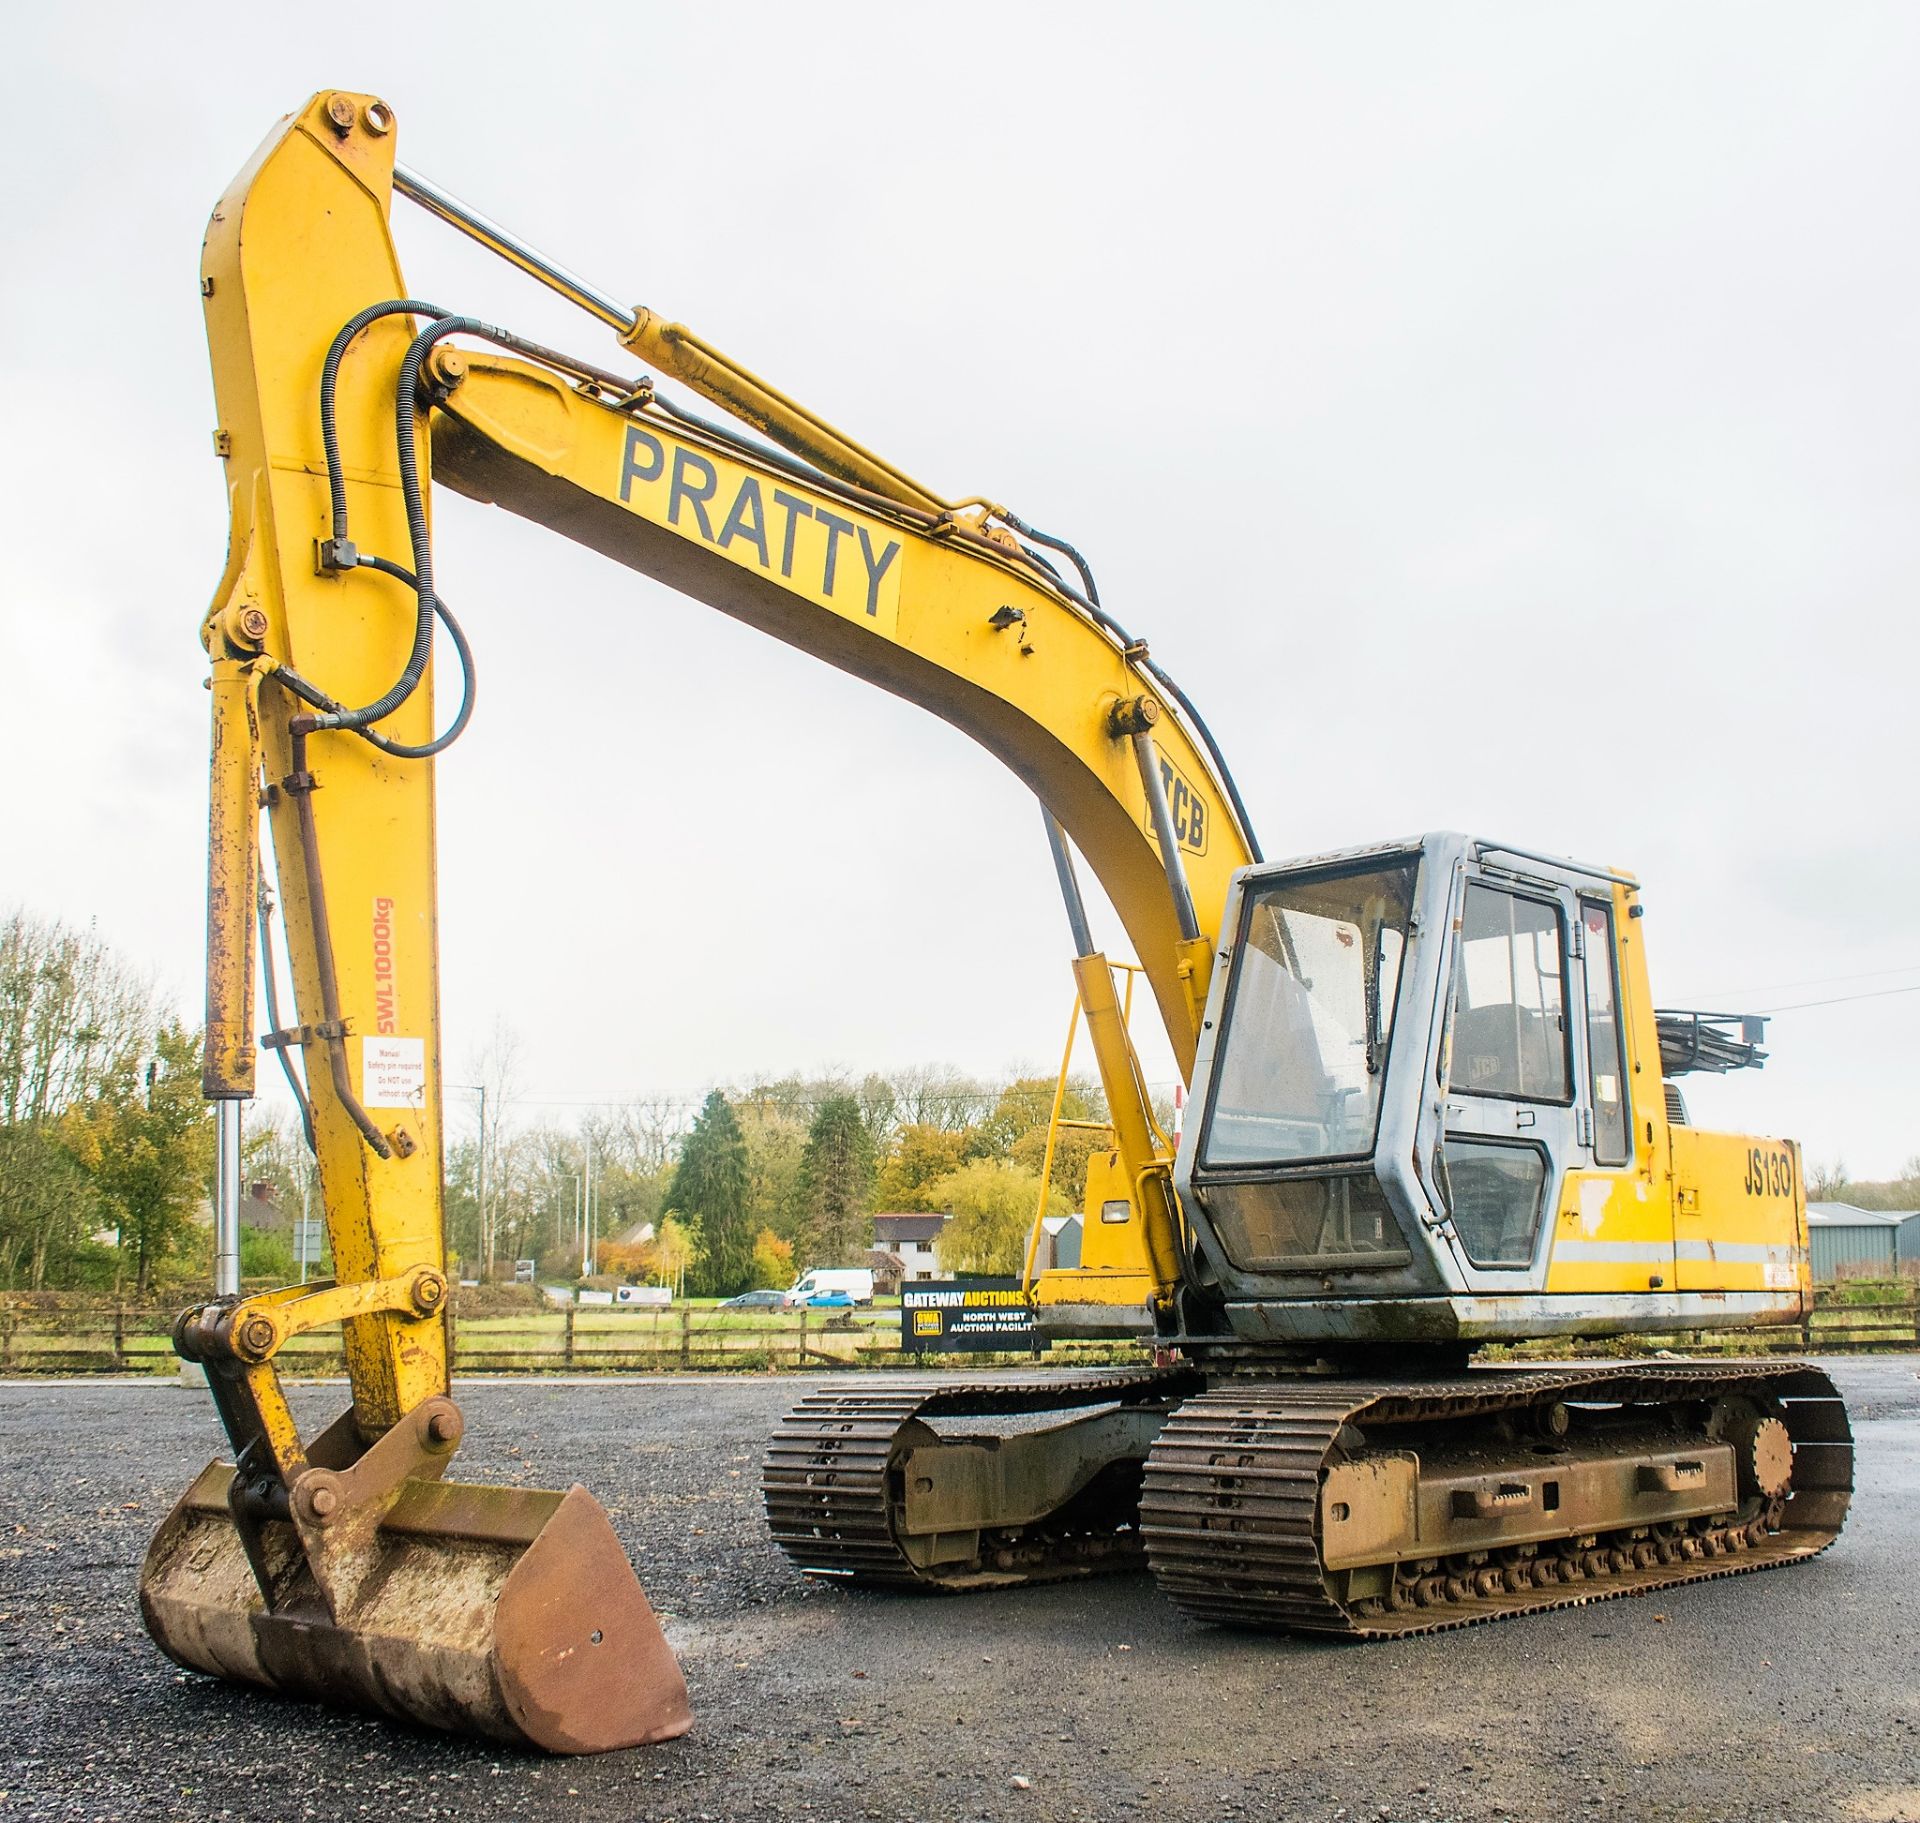 JCB JS130 13 tonne steel tracked excavator Year: S/N: Recorded Hours: 2999 (Not warrented, suspected